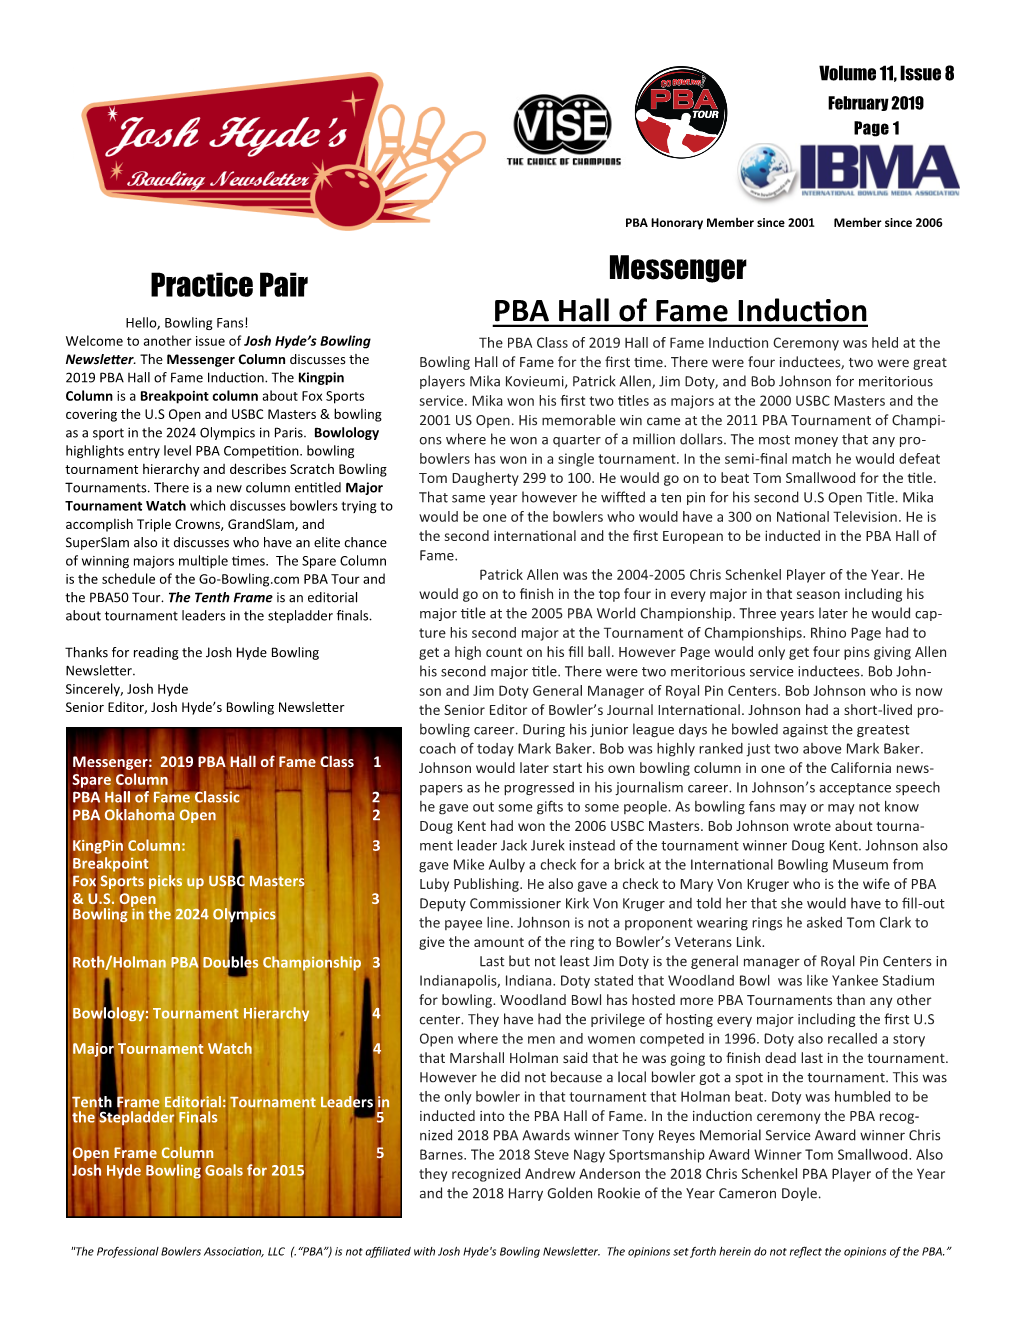 PBA Hall of Fame Induction Welcome to Another Issue of Josh Hyde’S Bowling the PBA Class of 2019 Hall of Fame Induction Ceremony Was Held at the Newsletter